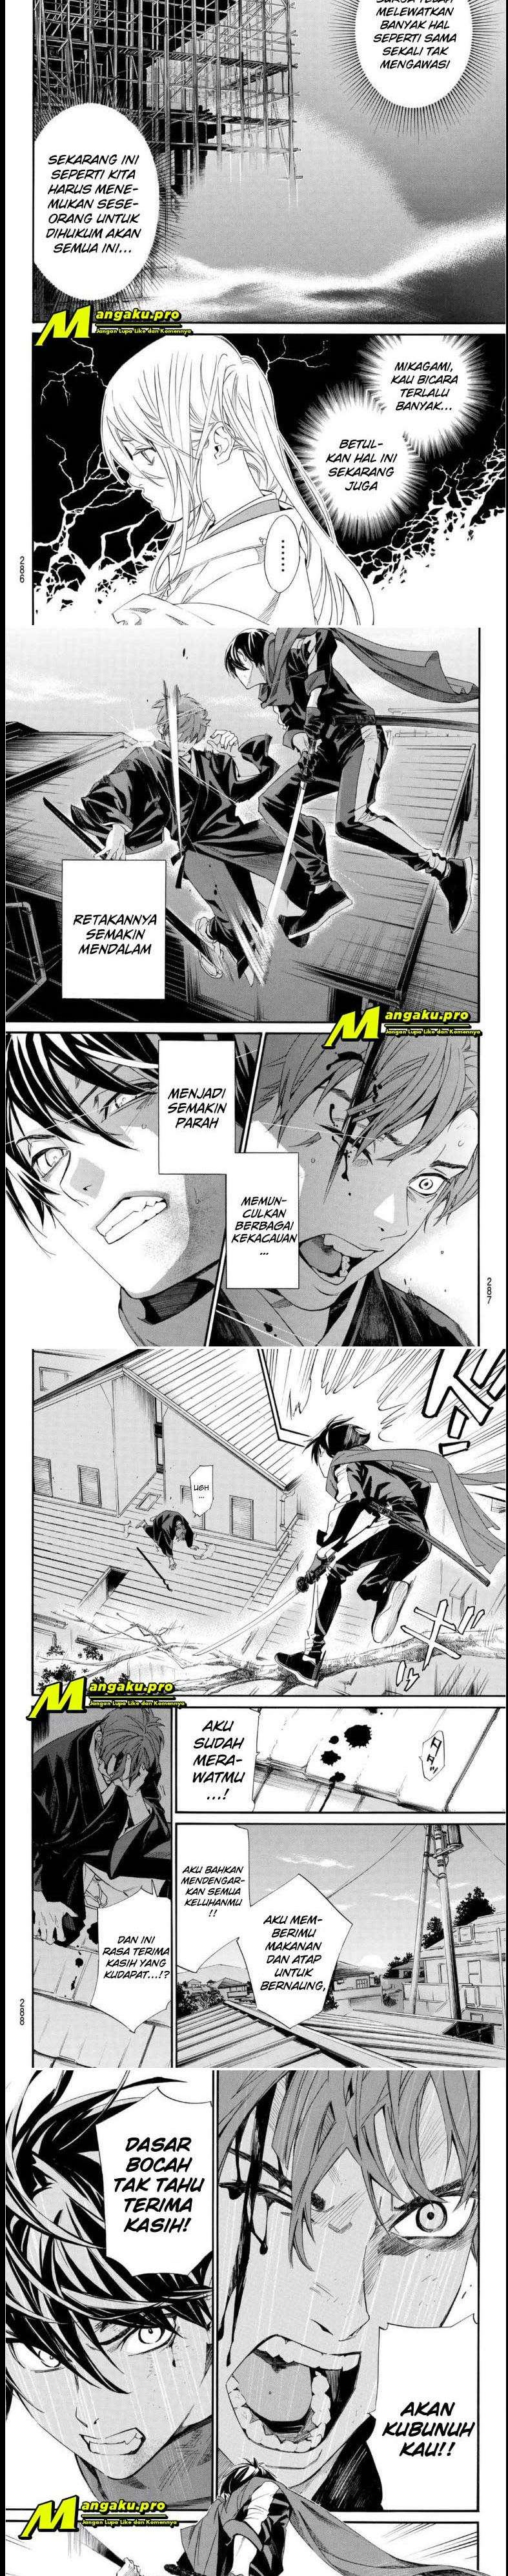 Noragami Chapter 95